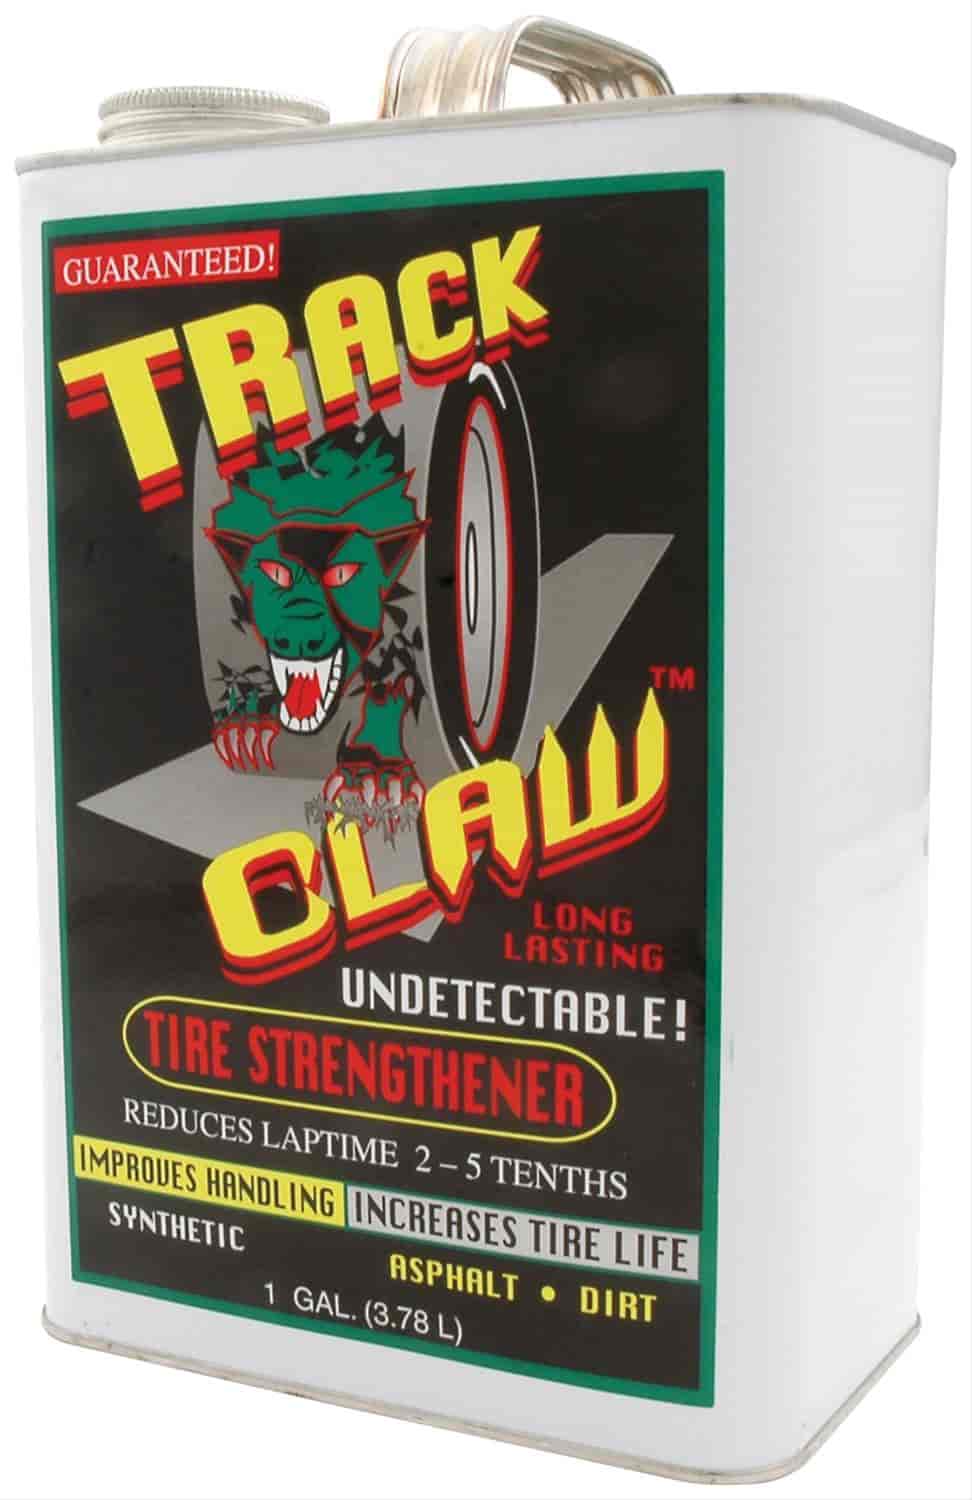 Track Claw Tire Strengthener Improves Handling & Tire Life